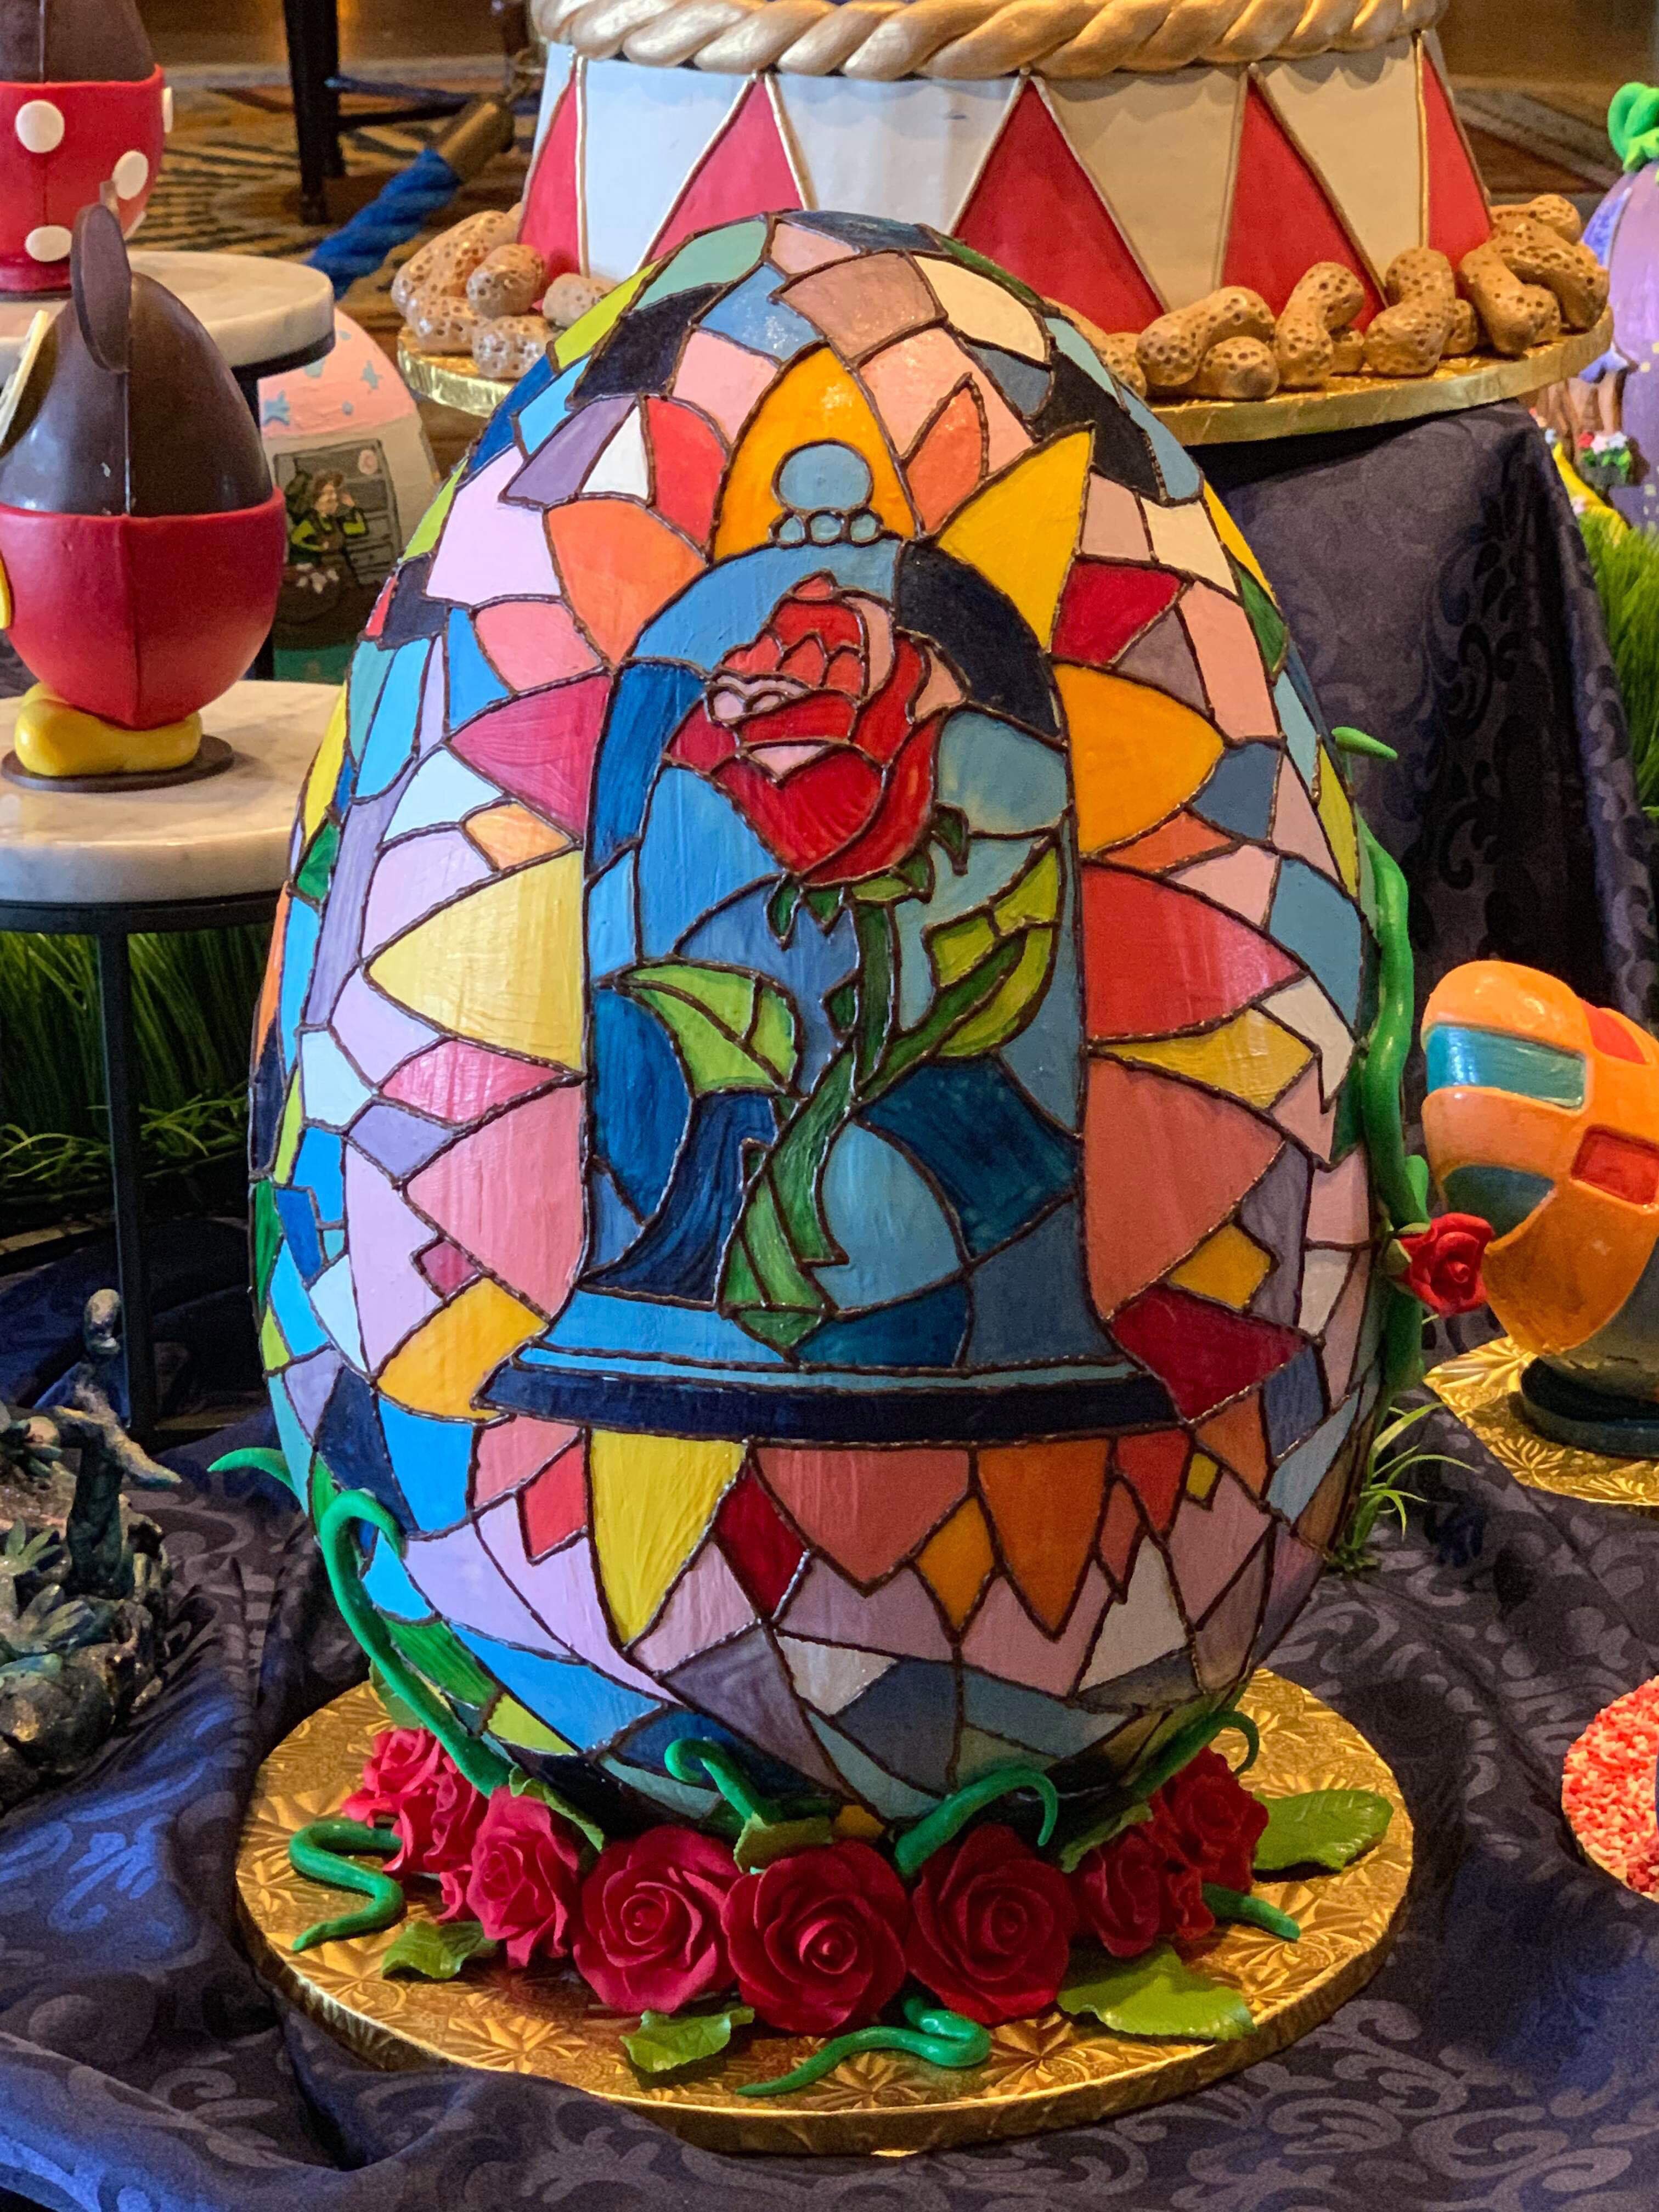 The 2019 Easter Egg Display At Disney’s Yacht & Beach Club Resorts